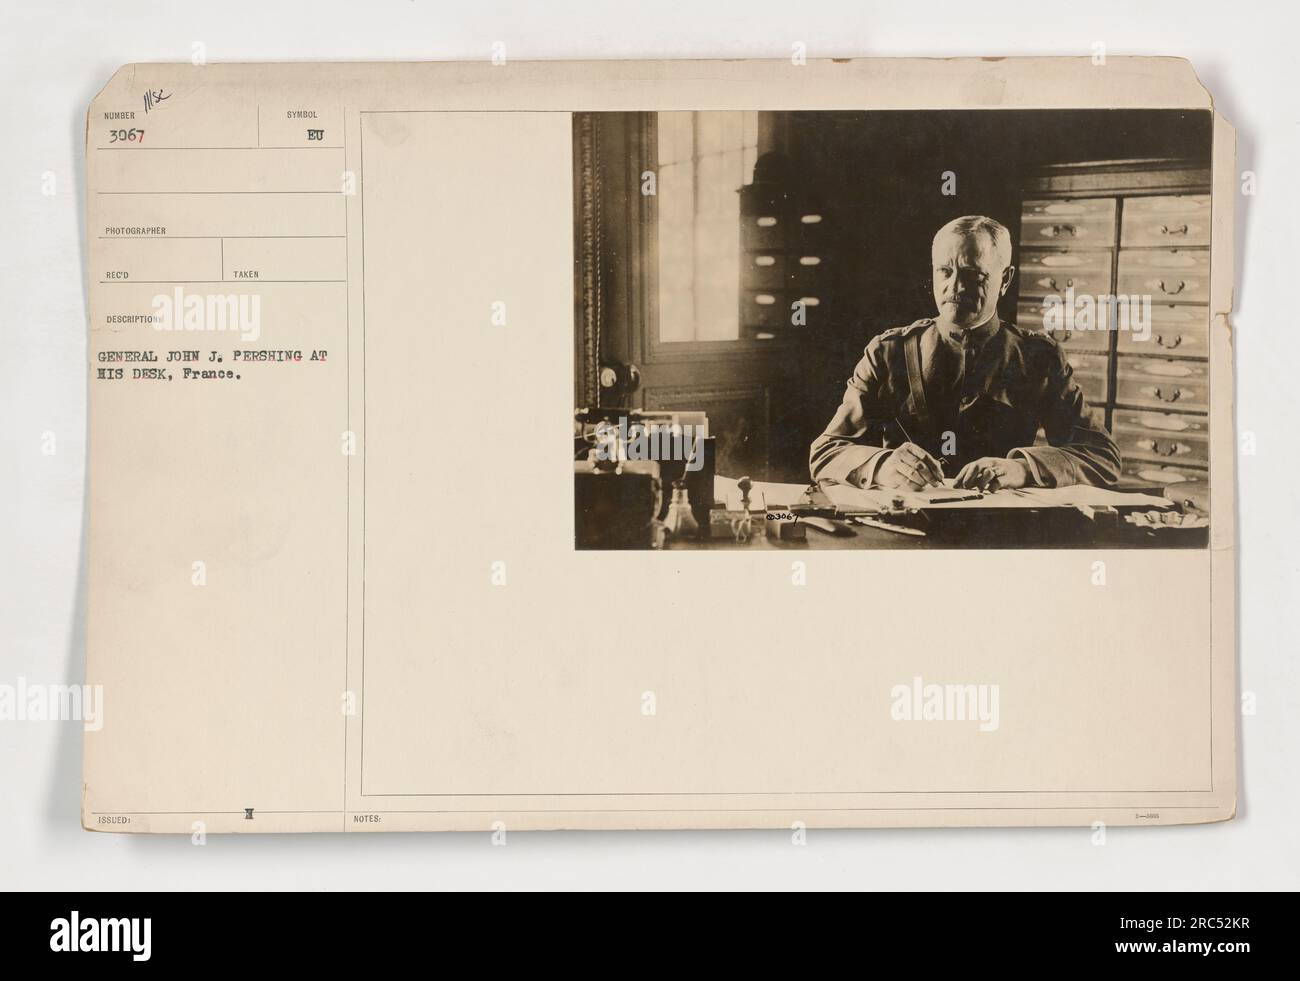 General John J. Pershing pictured at his desk in France. Stock Photo